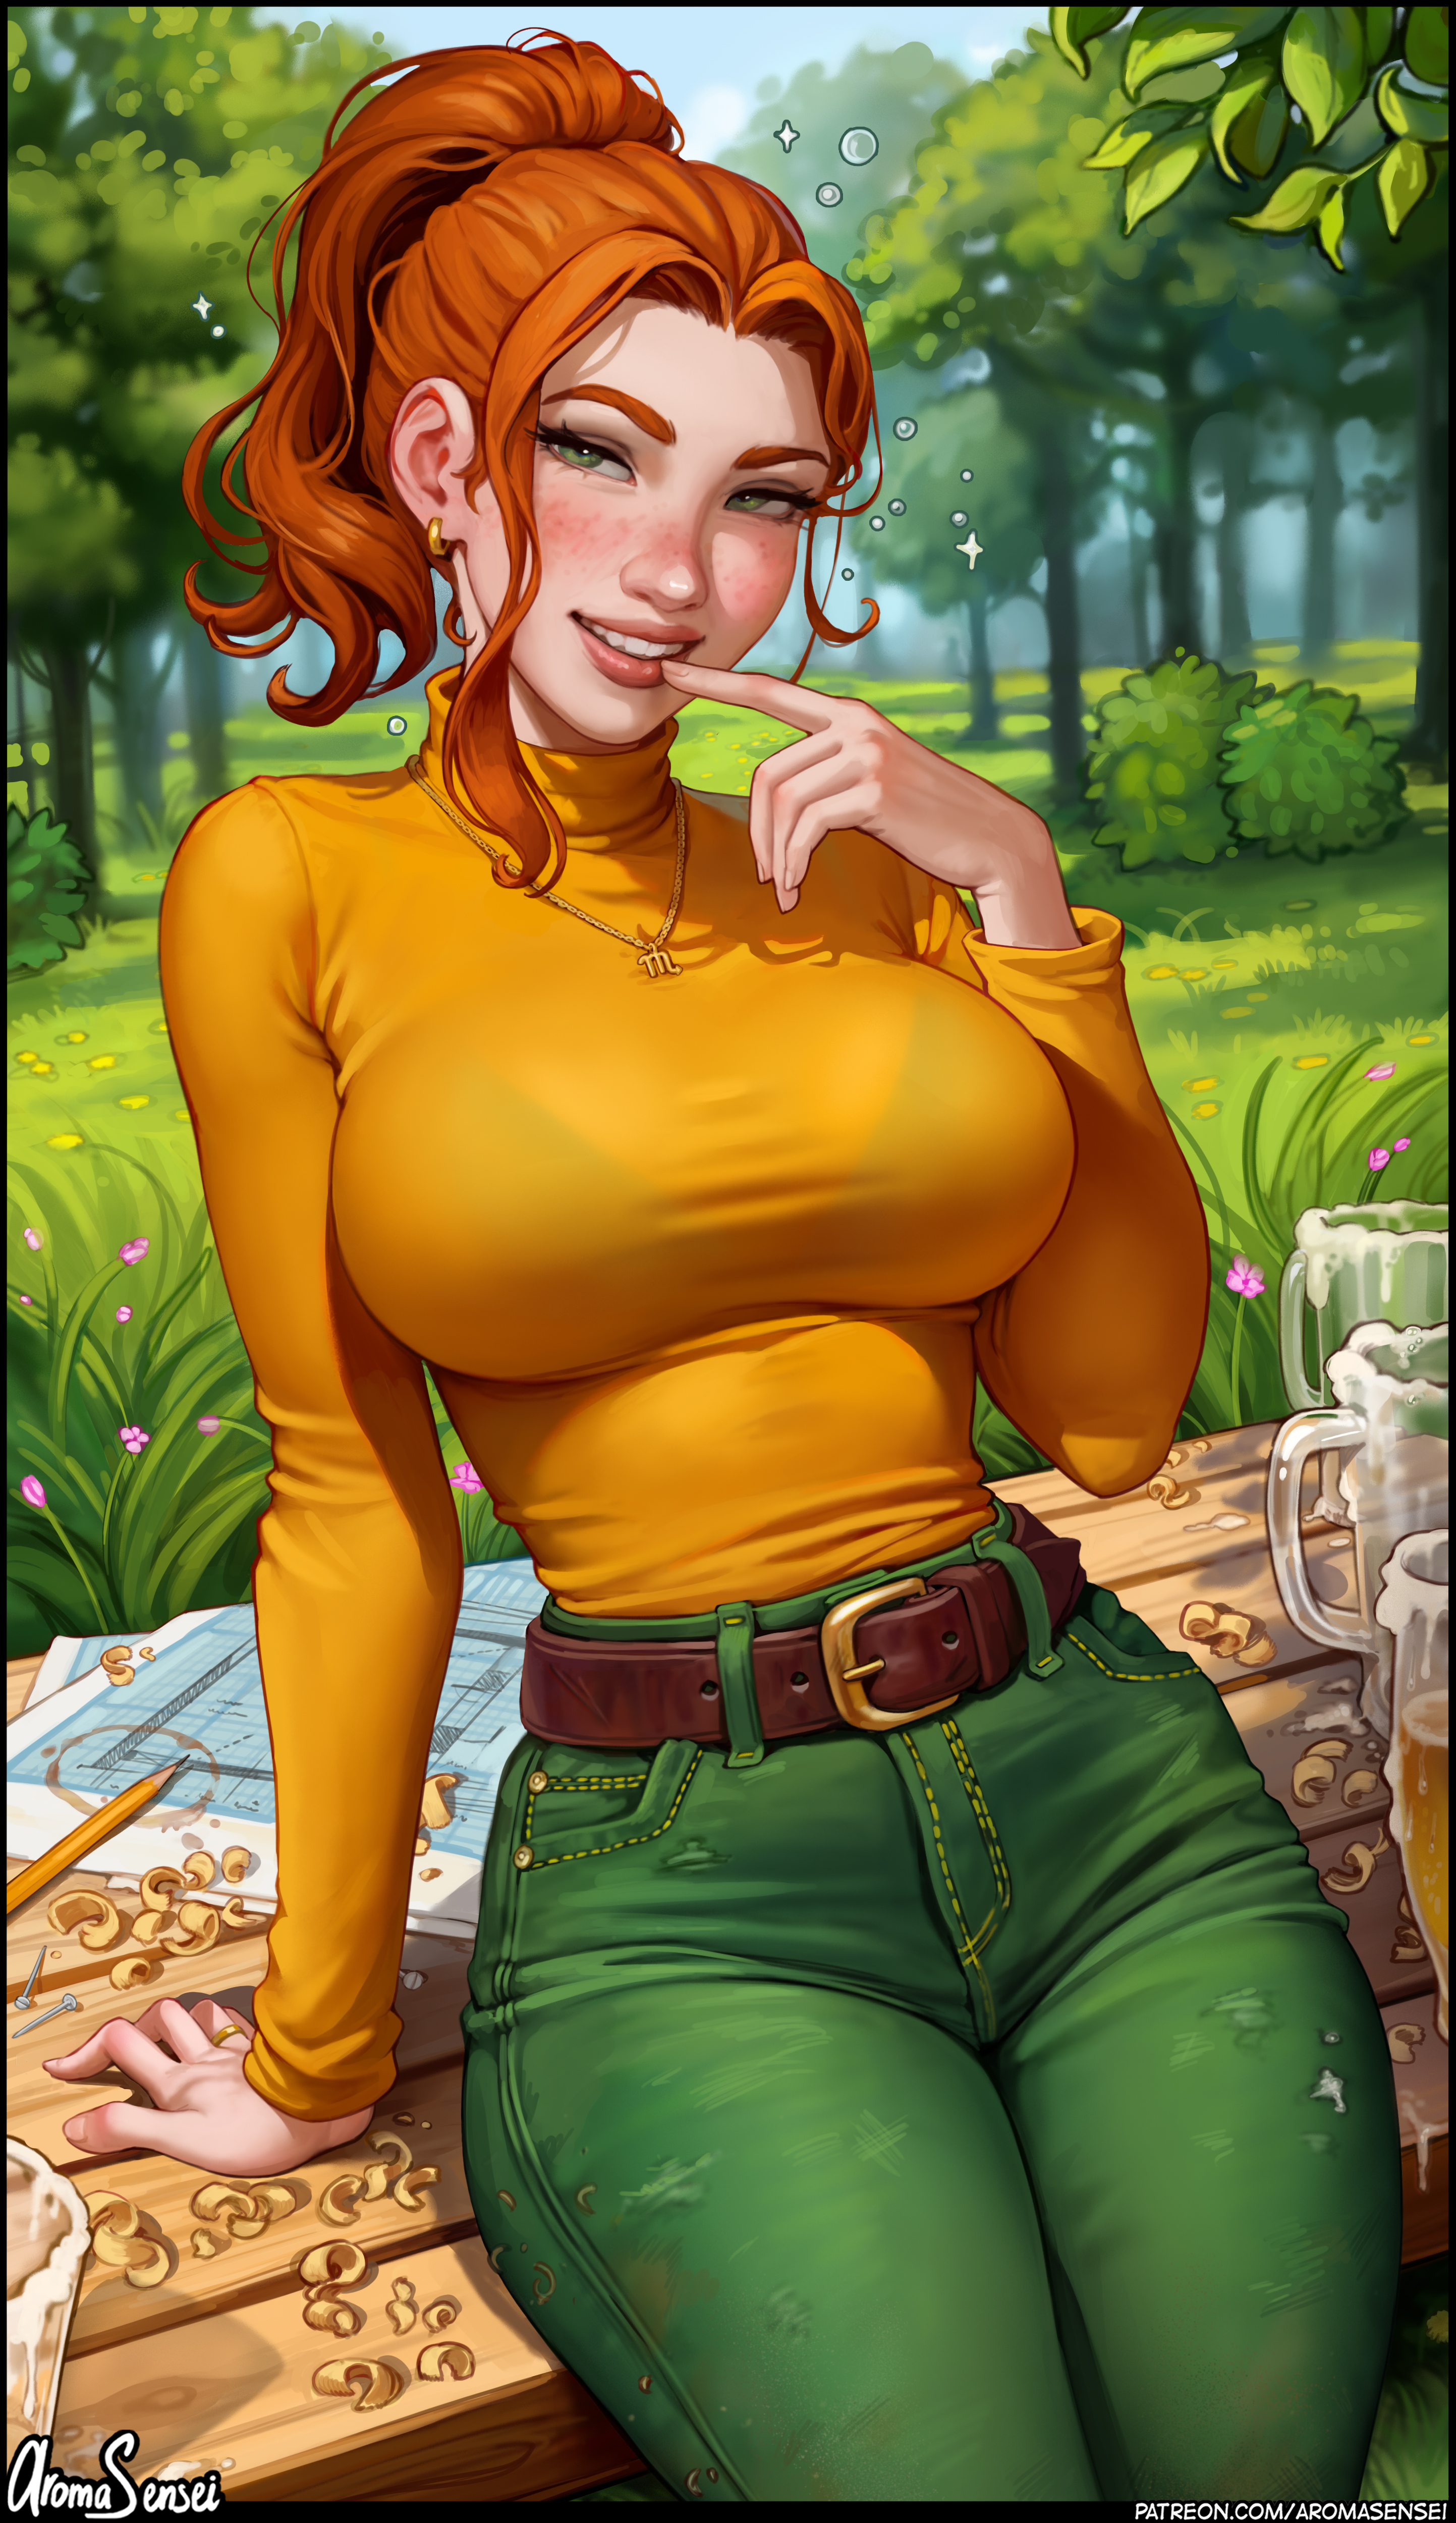 Robin Stardew Valley Stardew Valley Video Games Video Game Girls Video Game Characters Redhead Artwo 2886x5000